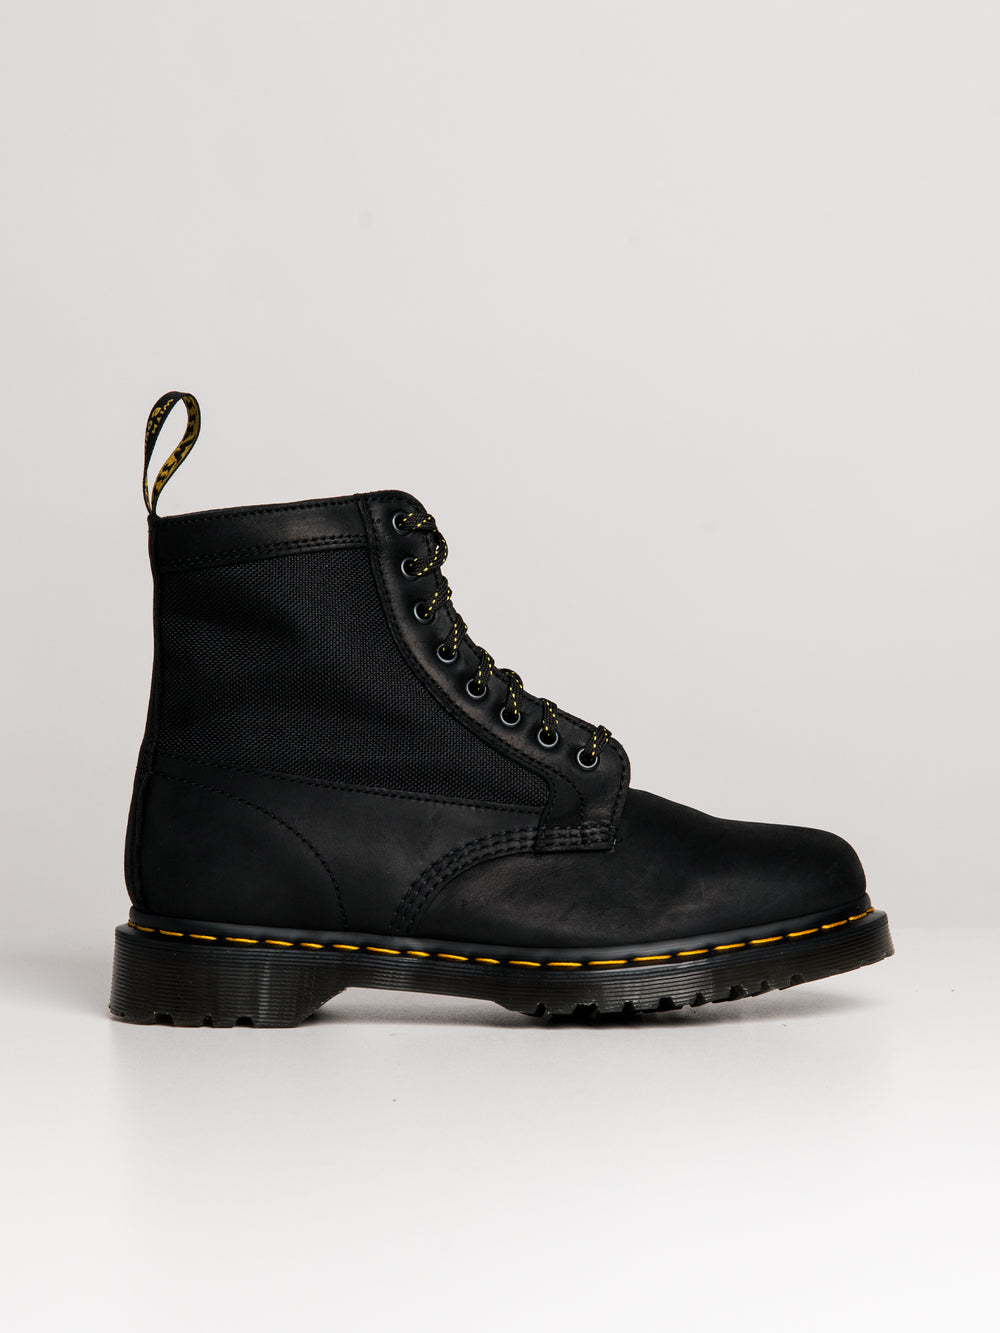 DR MARTENS 1460 PANEL STREETER BOOT - CLEARANCE